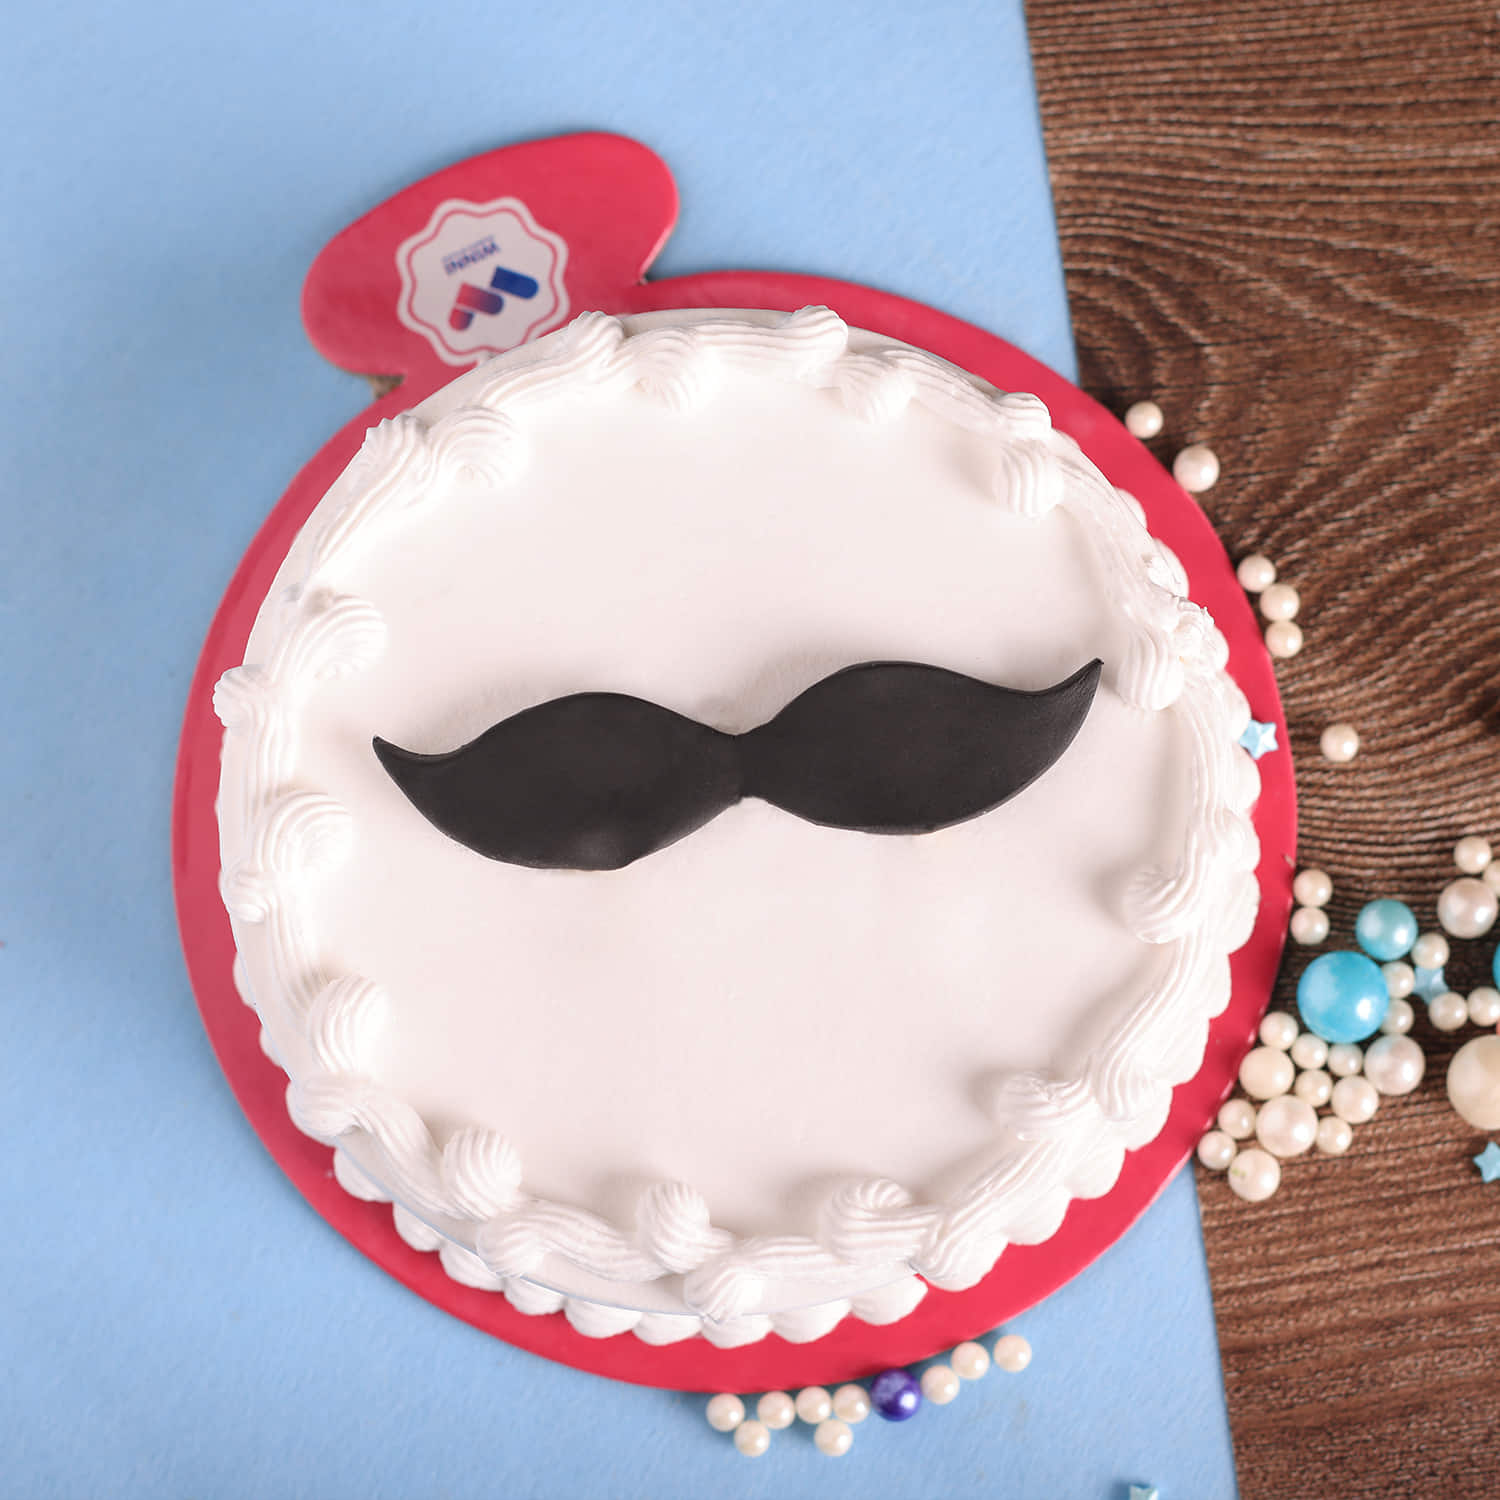 Mustache Theme Cake Delivery in Delhi NCR - ₹2,349.00 Cake Express